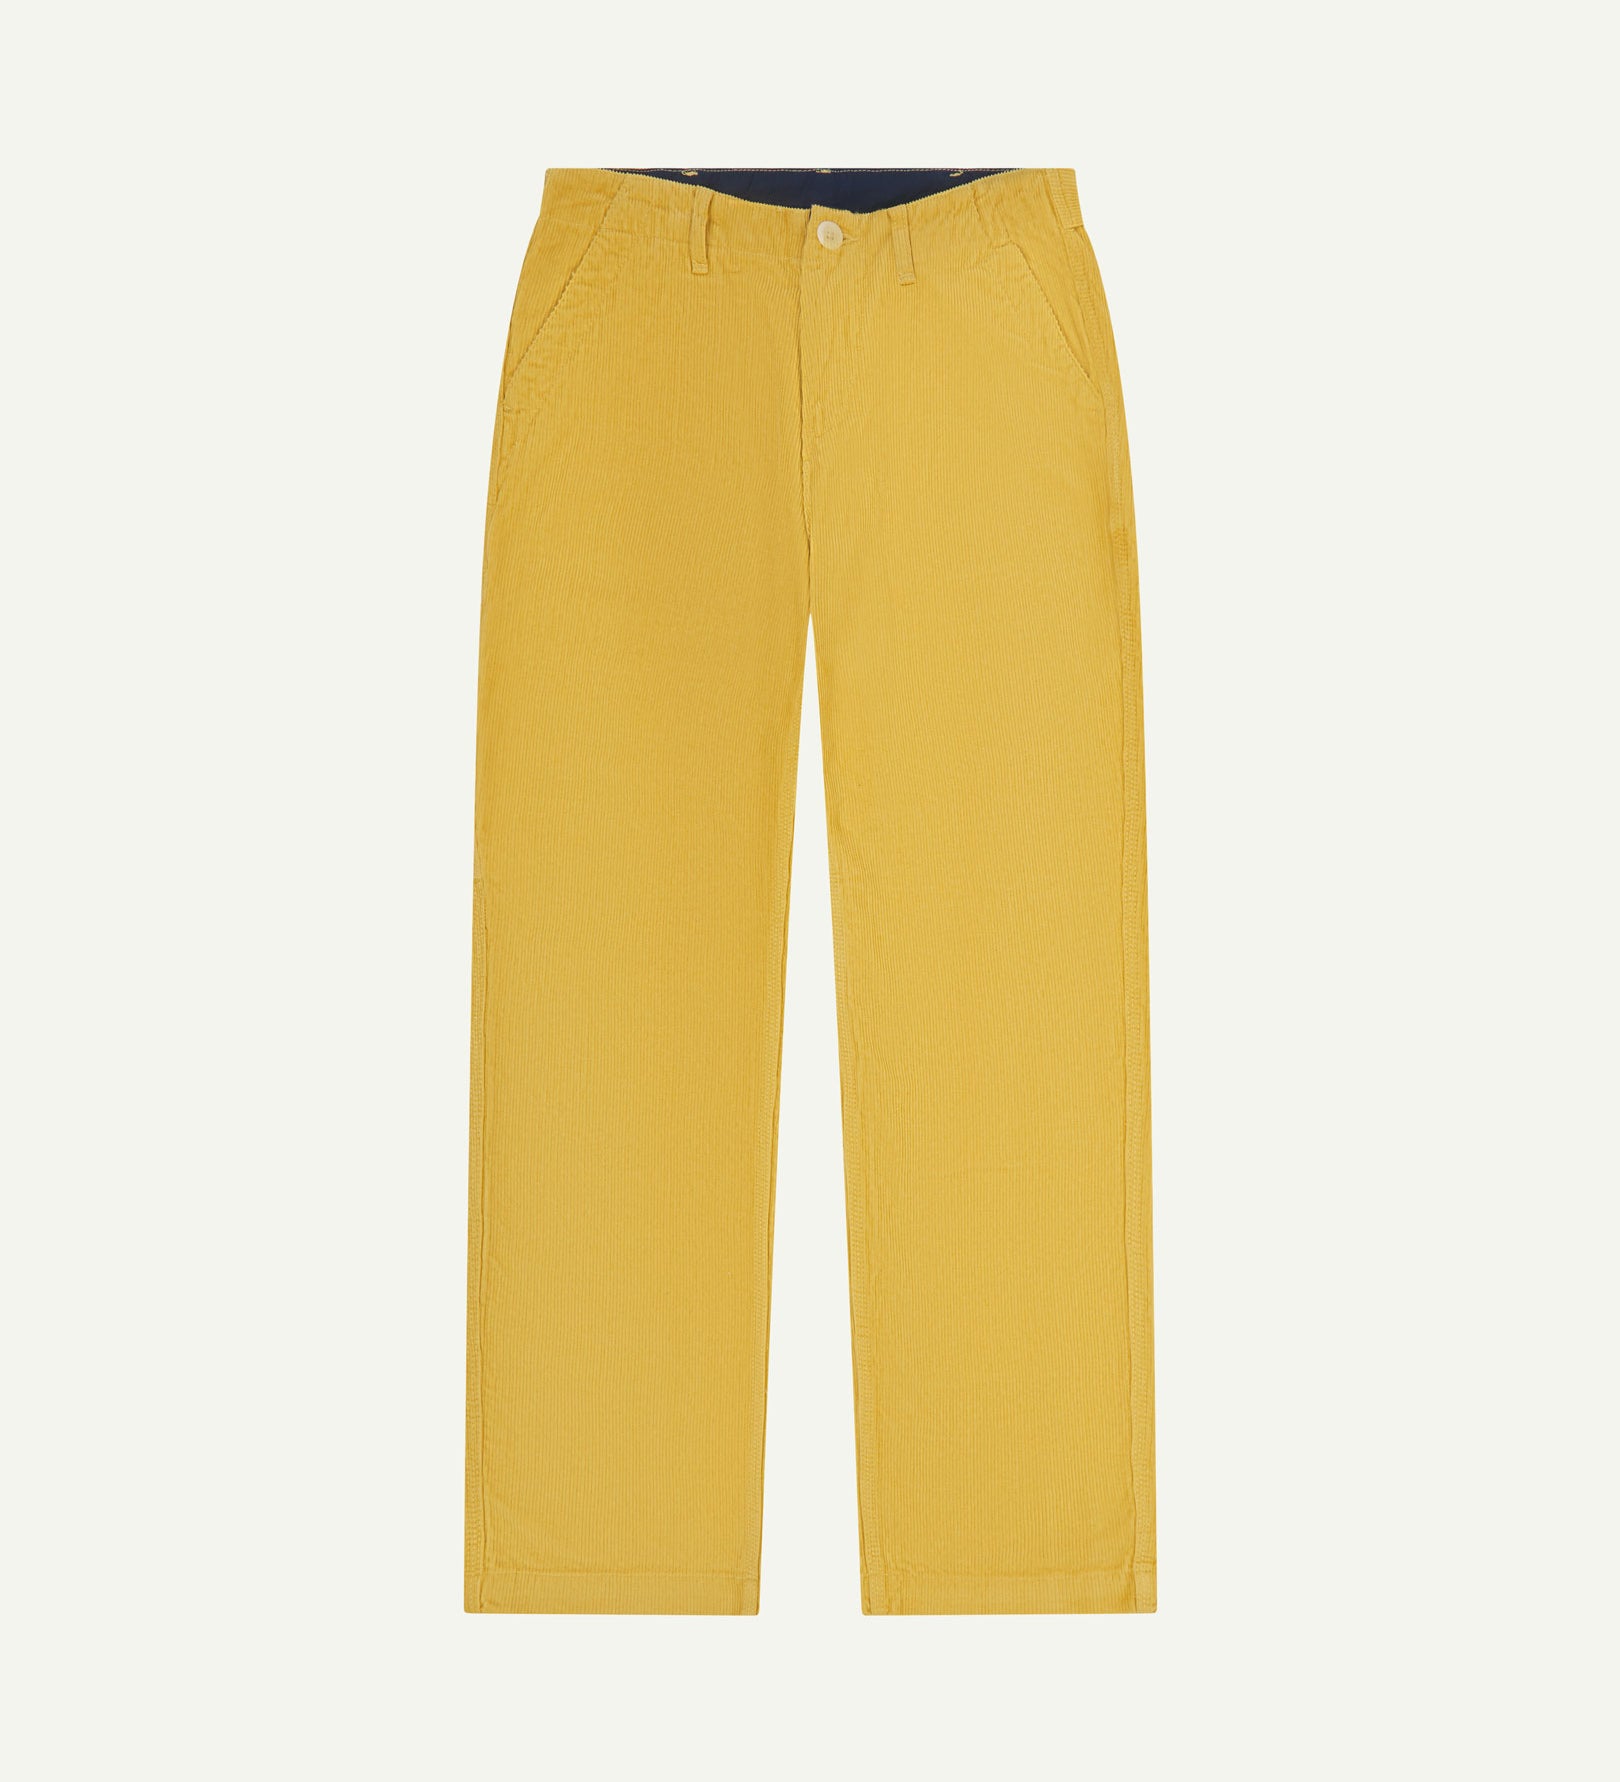 Full length front view of Uskees 5012 men's organic cord acid yellow (citronella) casual trousers with a view of adjustable waistband and straight leg sillhouette.